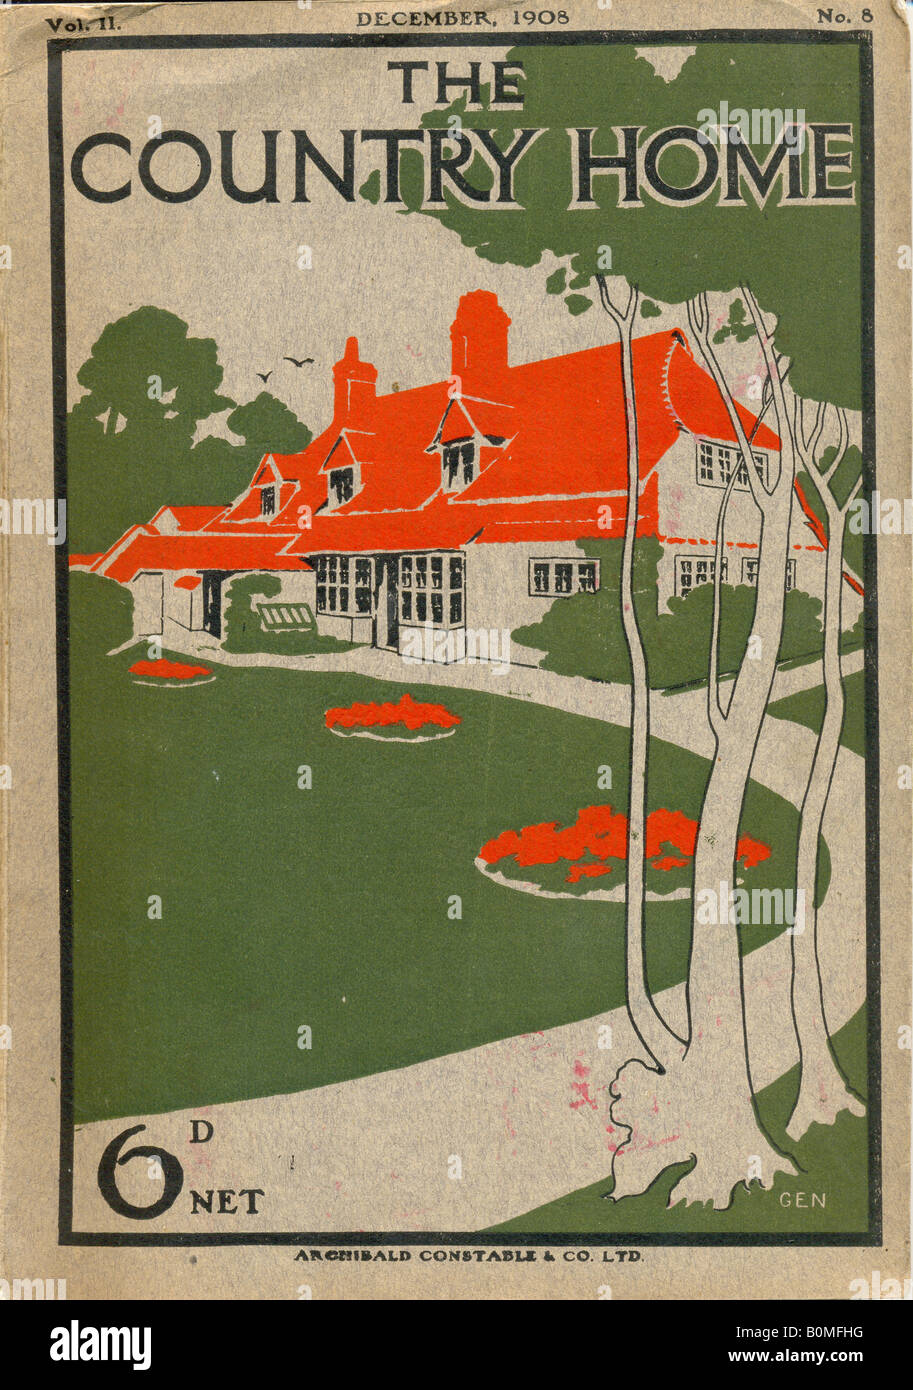 The Country Home magazine cover 1908 Stock Photo